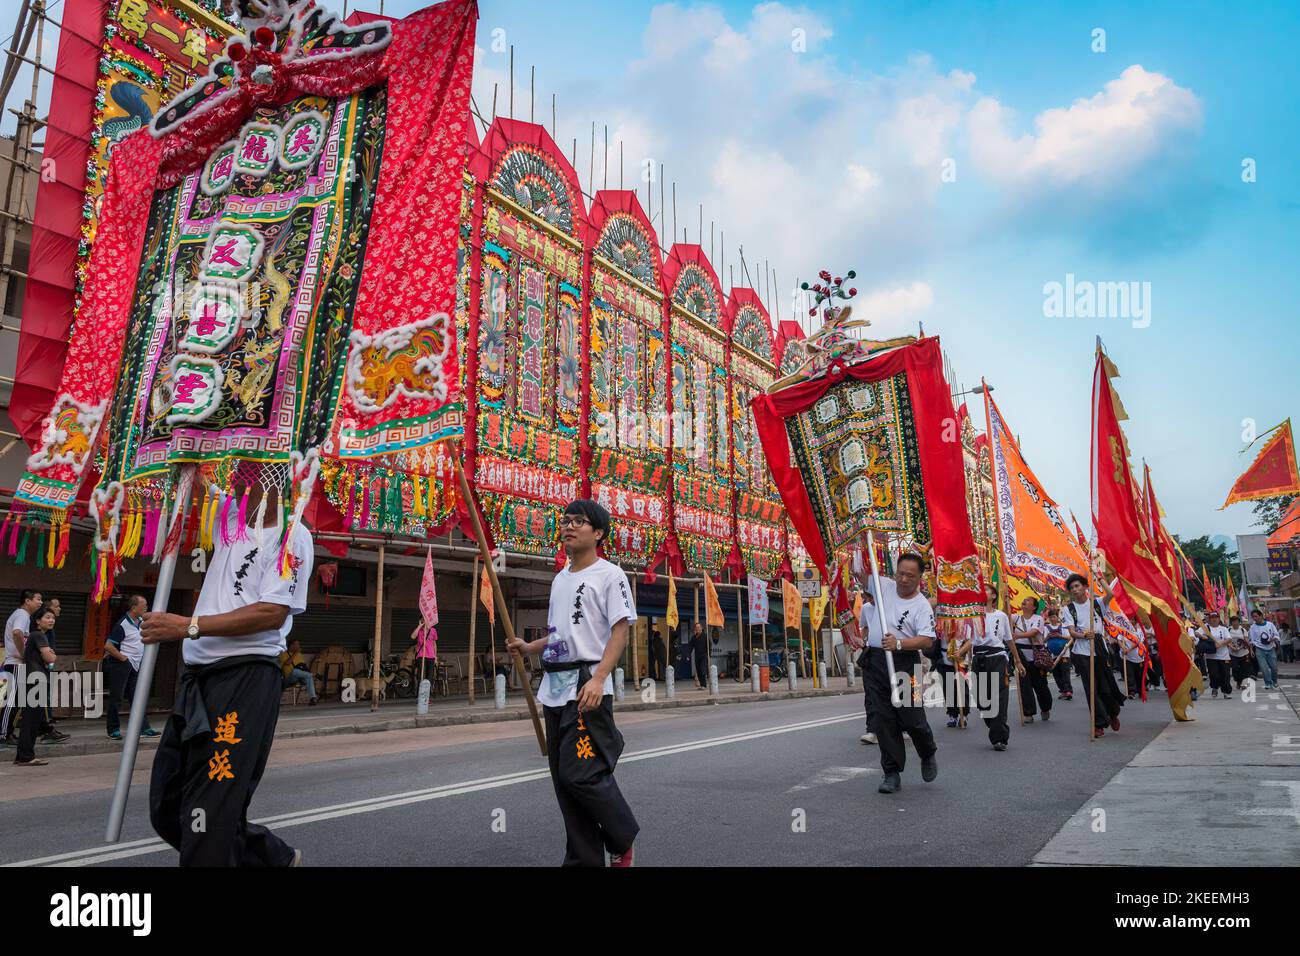 Villagers carry elaborate, colourful banners in a procession on the main street of Kam Tin village at the decennial Da Jiu festival, Hong Kong, 2015 Stock Photo